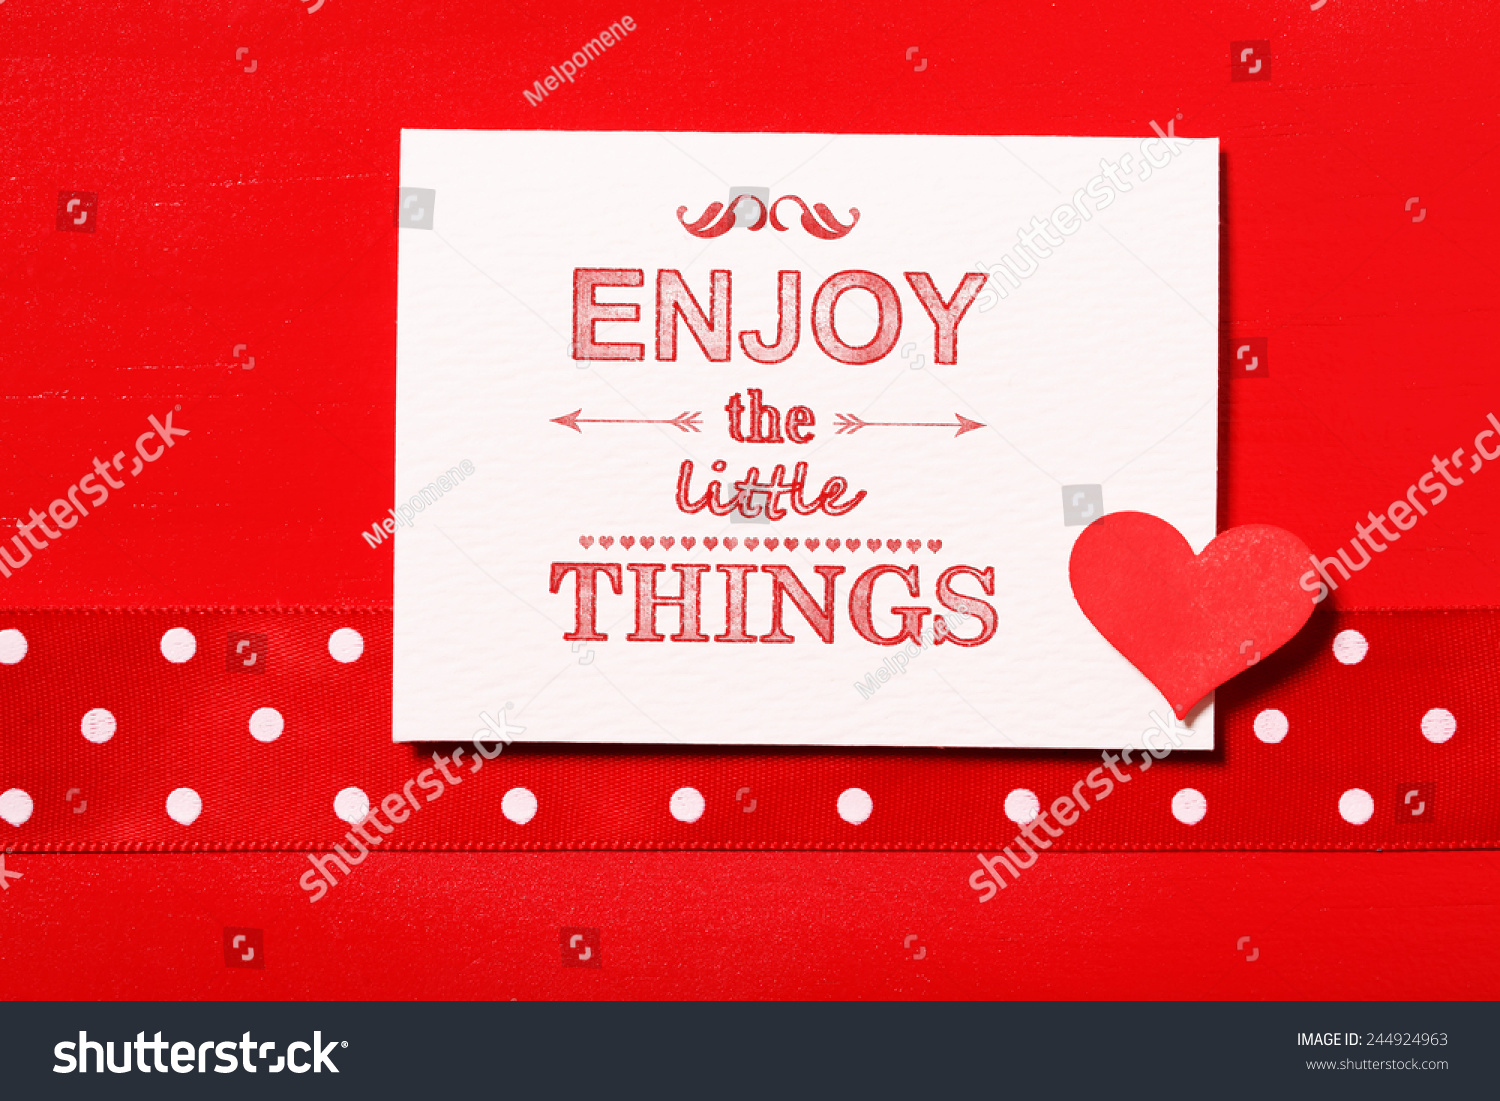 Enjoy the little things text with small red heart #244924963